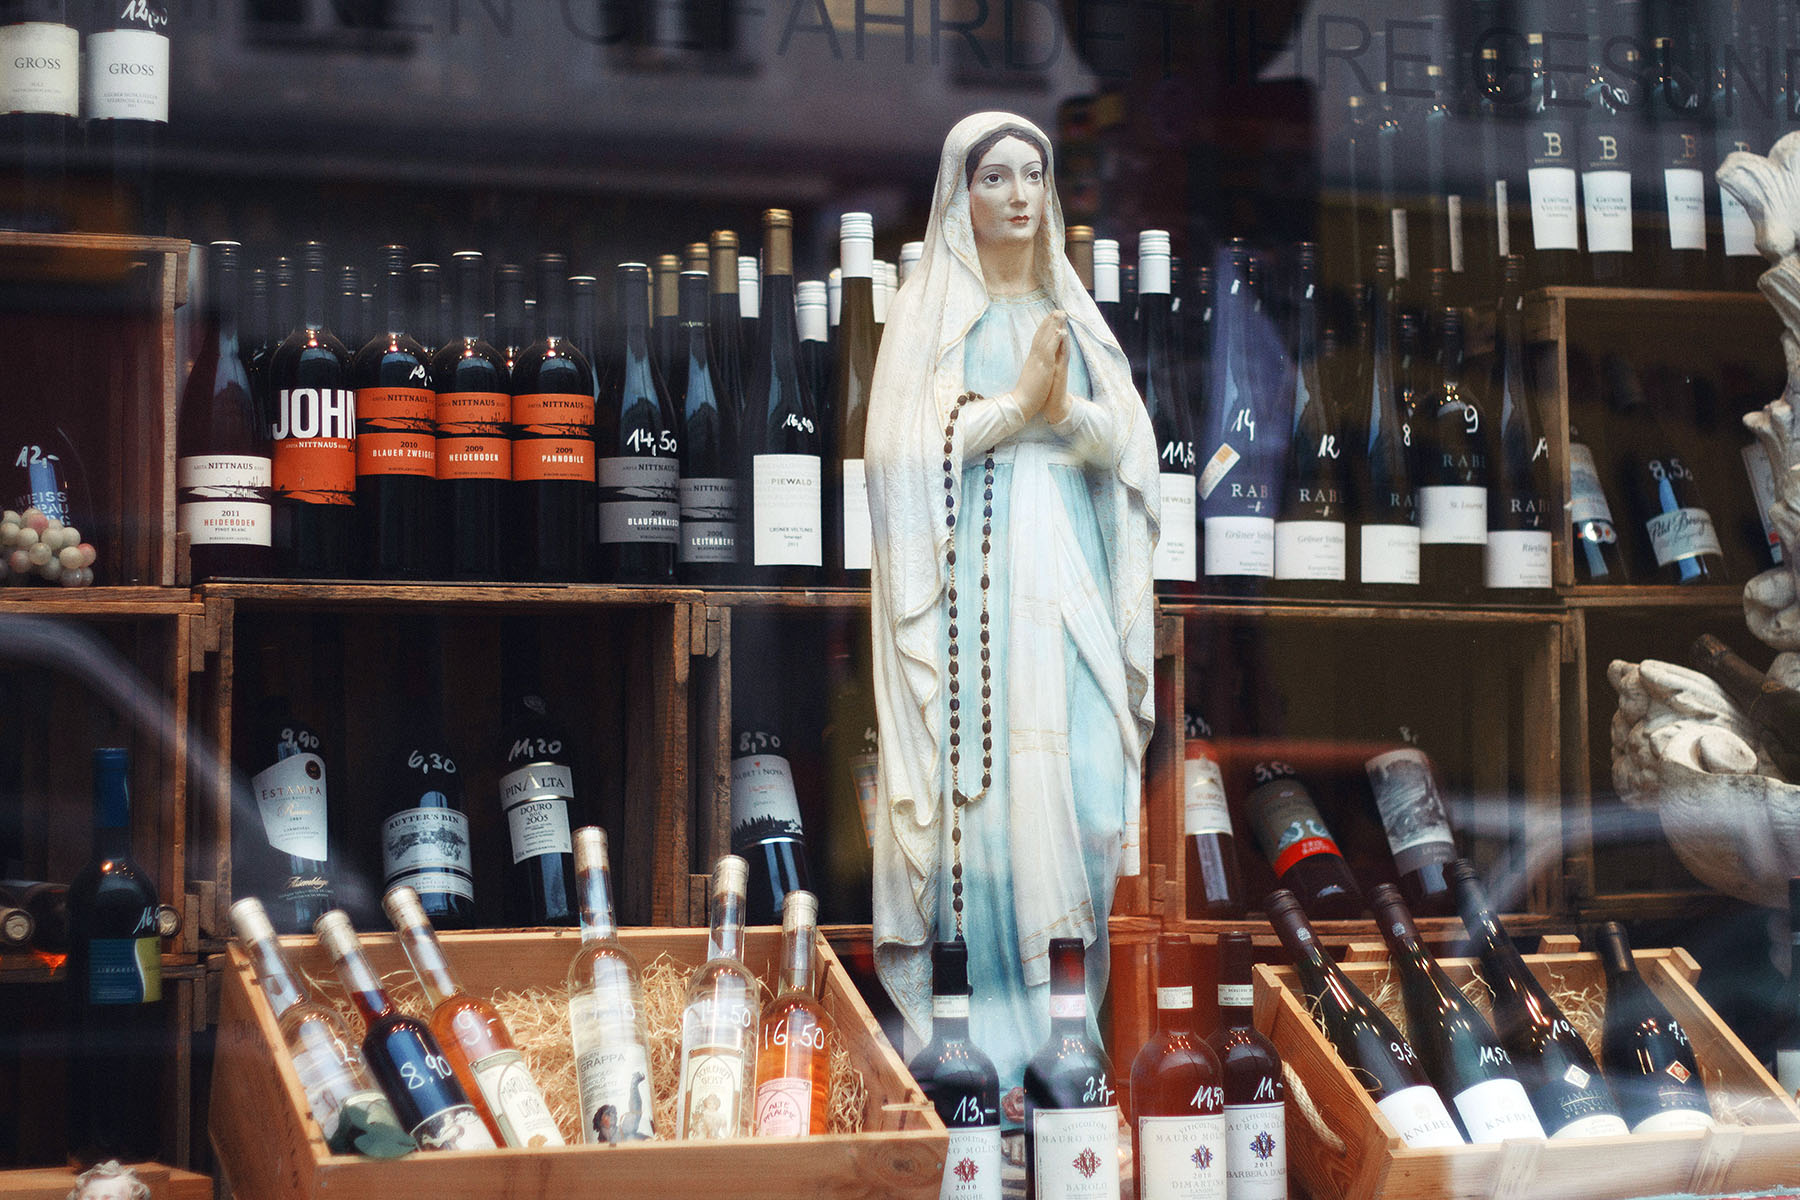 Closeup of a Mother Mary statue inside a wine store in Berlin, Germany.